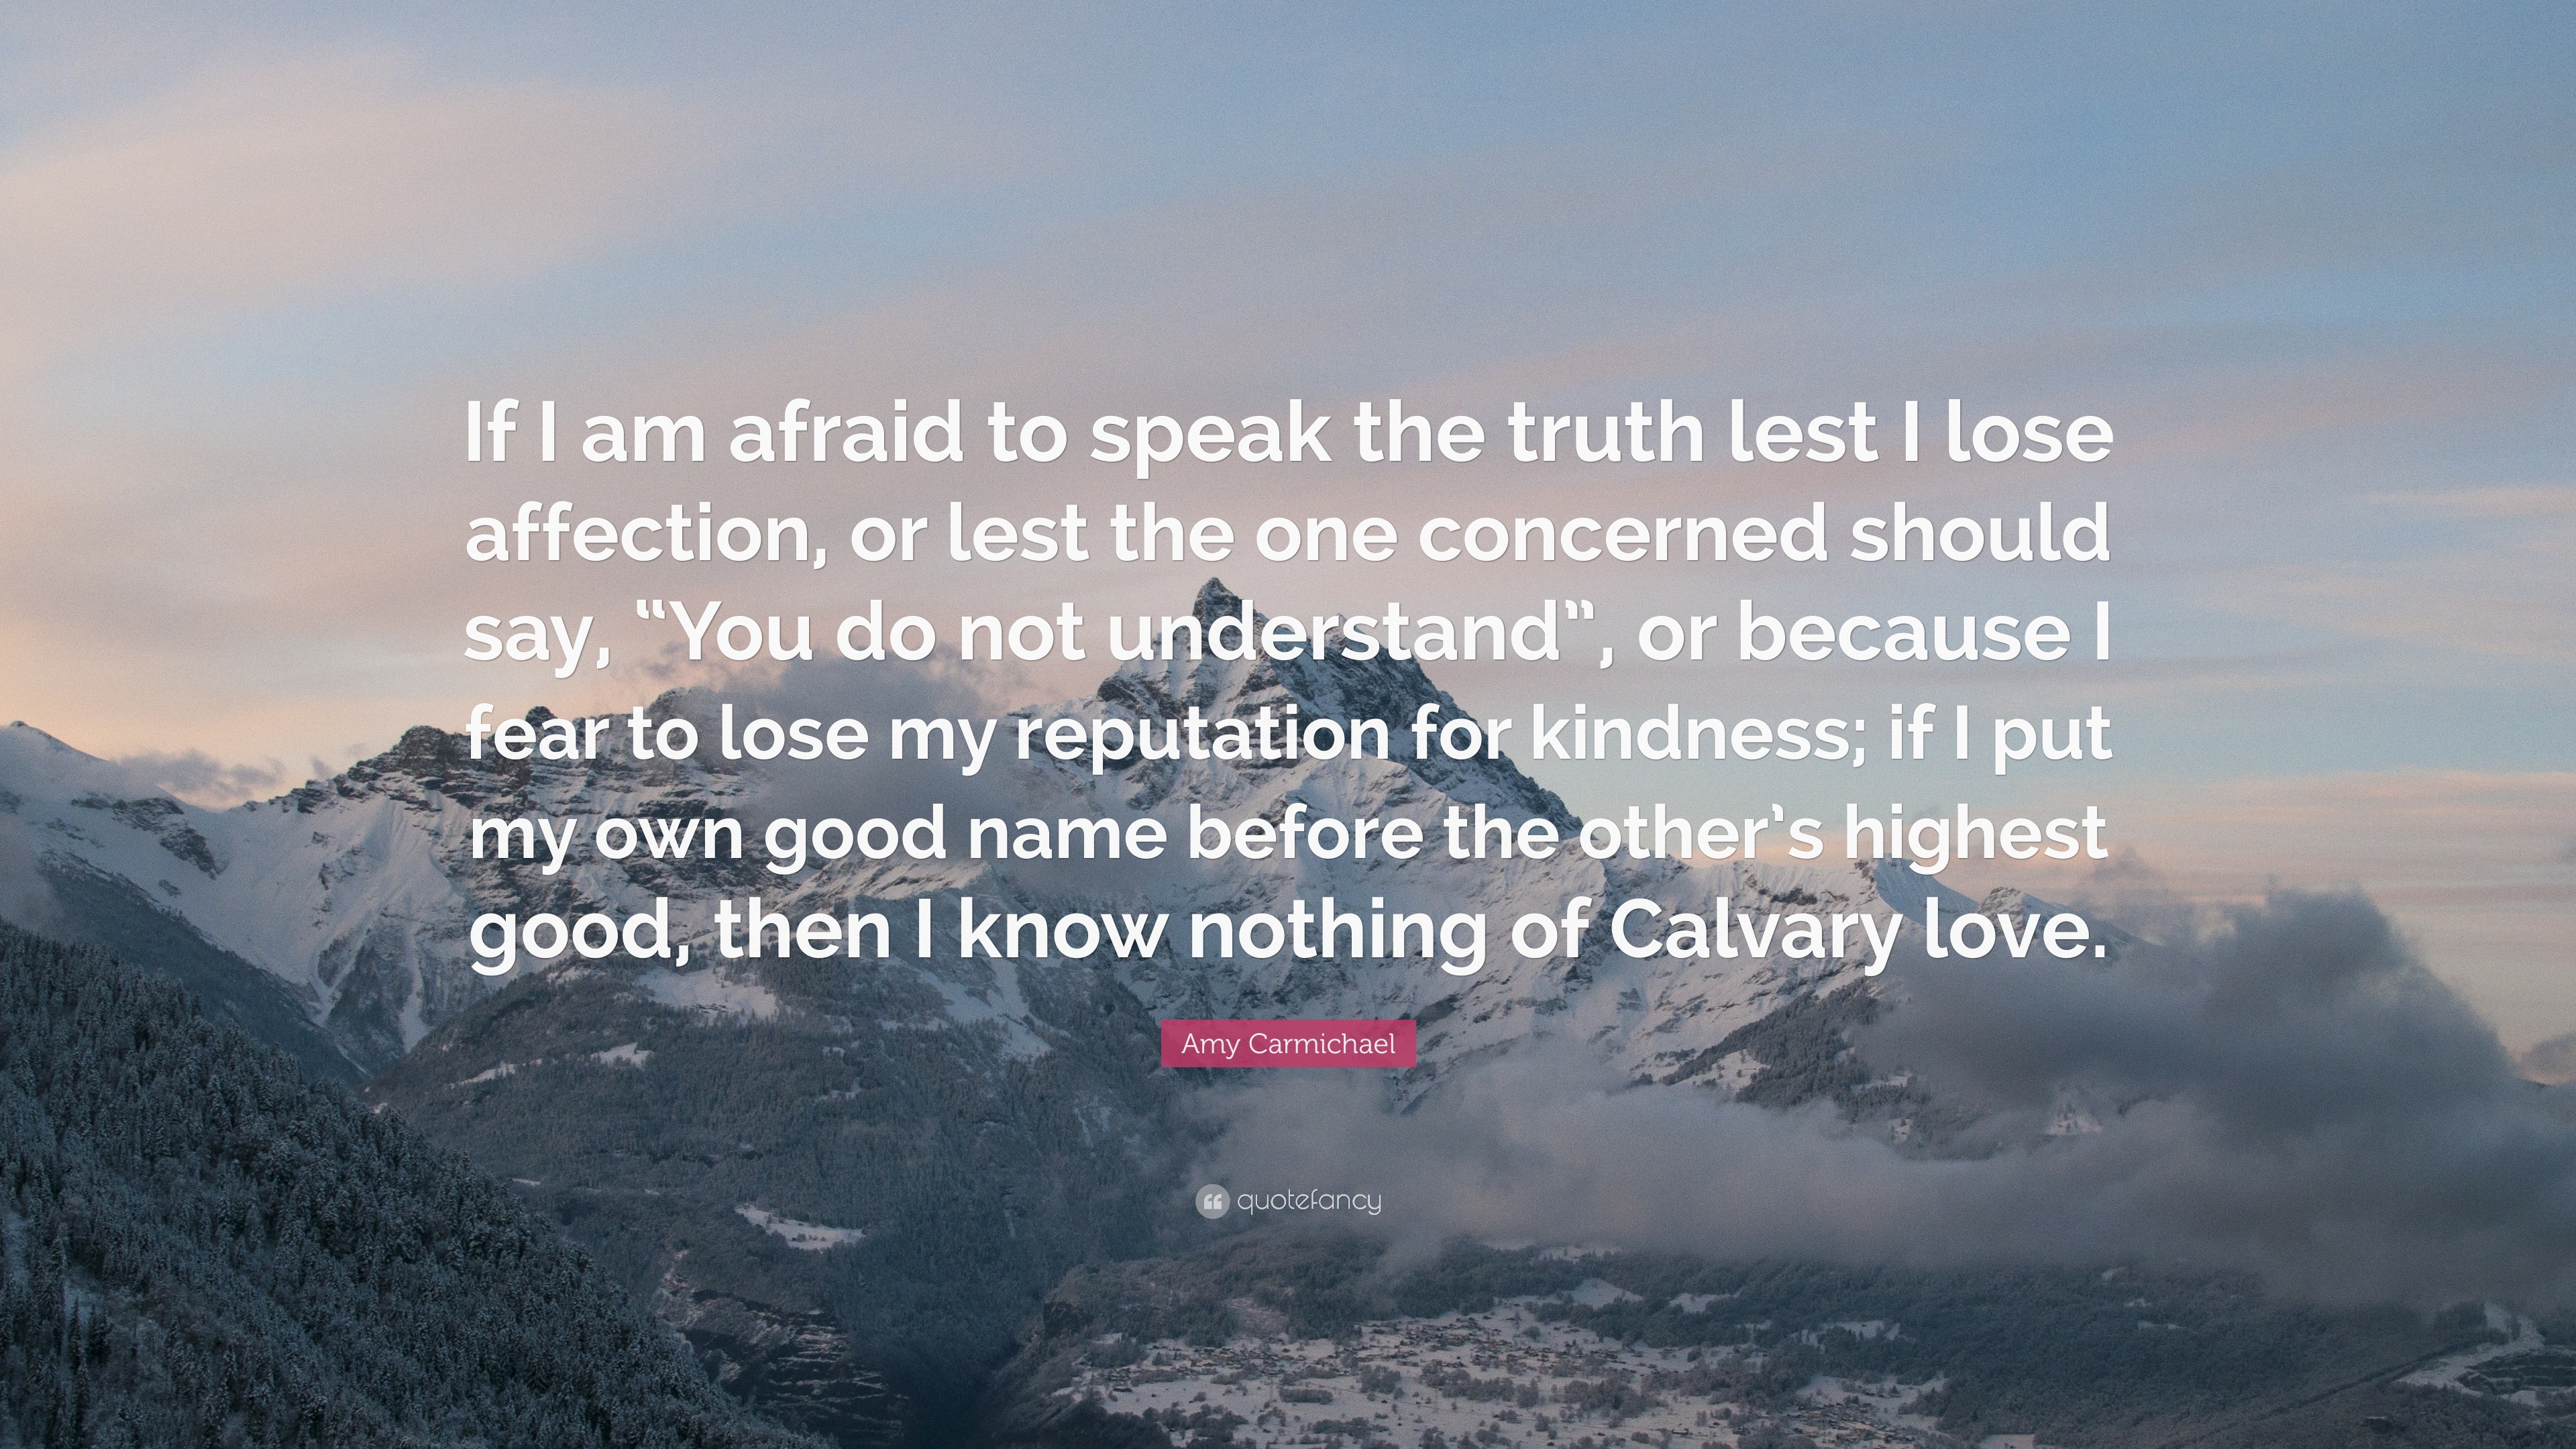 Amy Carmichael Quote “If I am afraid to speak the truth lest I lose